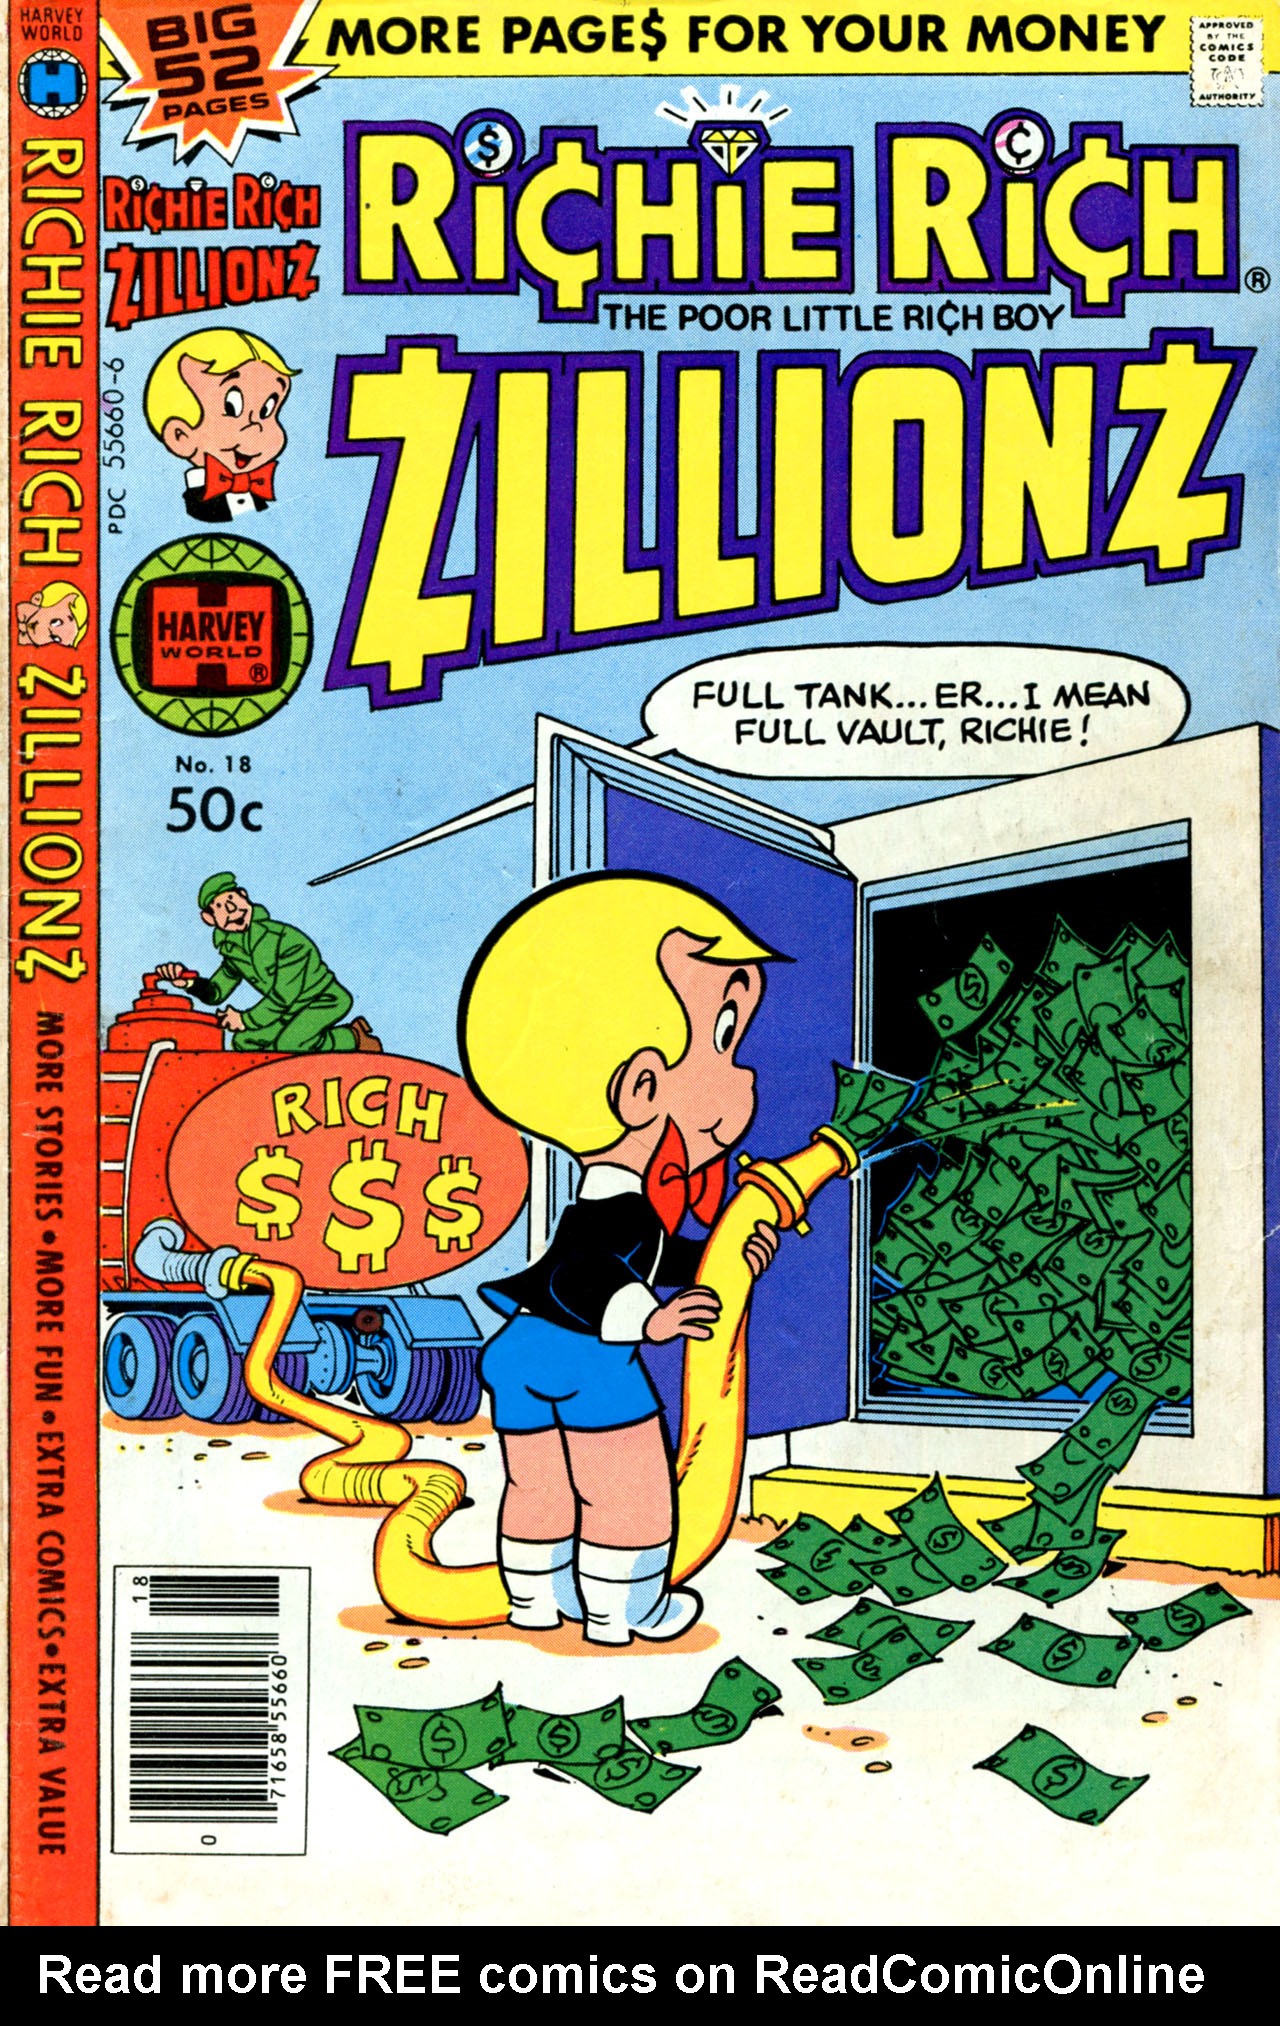 Richie Rich Cartoon Porn - Richie Rich Zillionz Issue 18 | Read Richie Rich Zillionz Issue 18 comic  online in high quality. Read Full Comic online for free - Read comics  online in high quality .|viewcomiconline.com